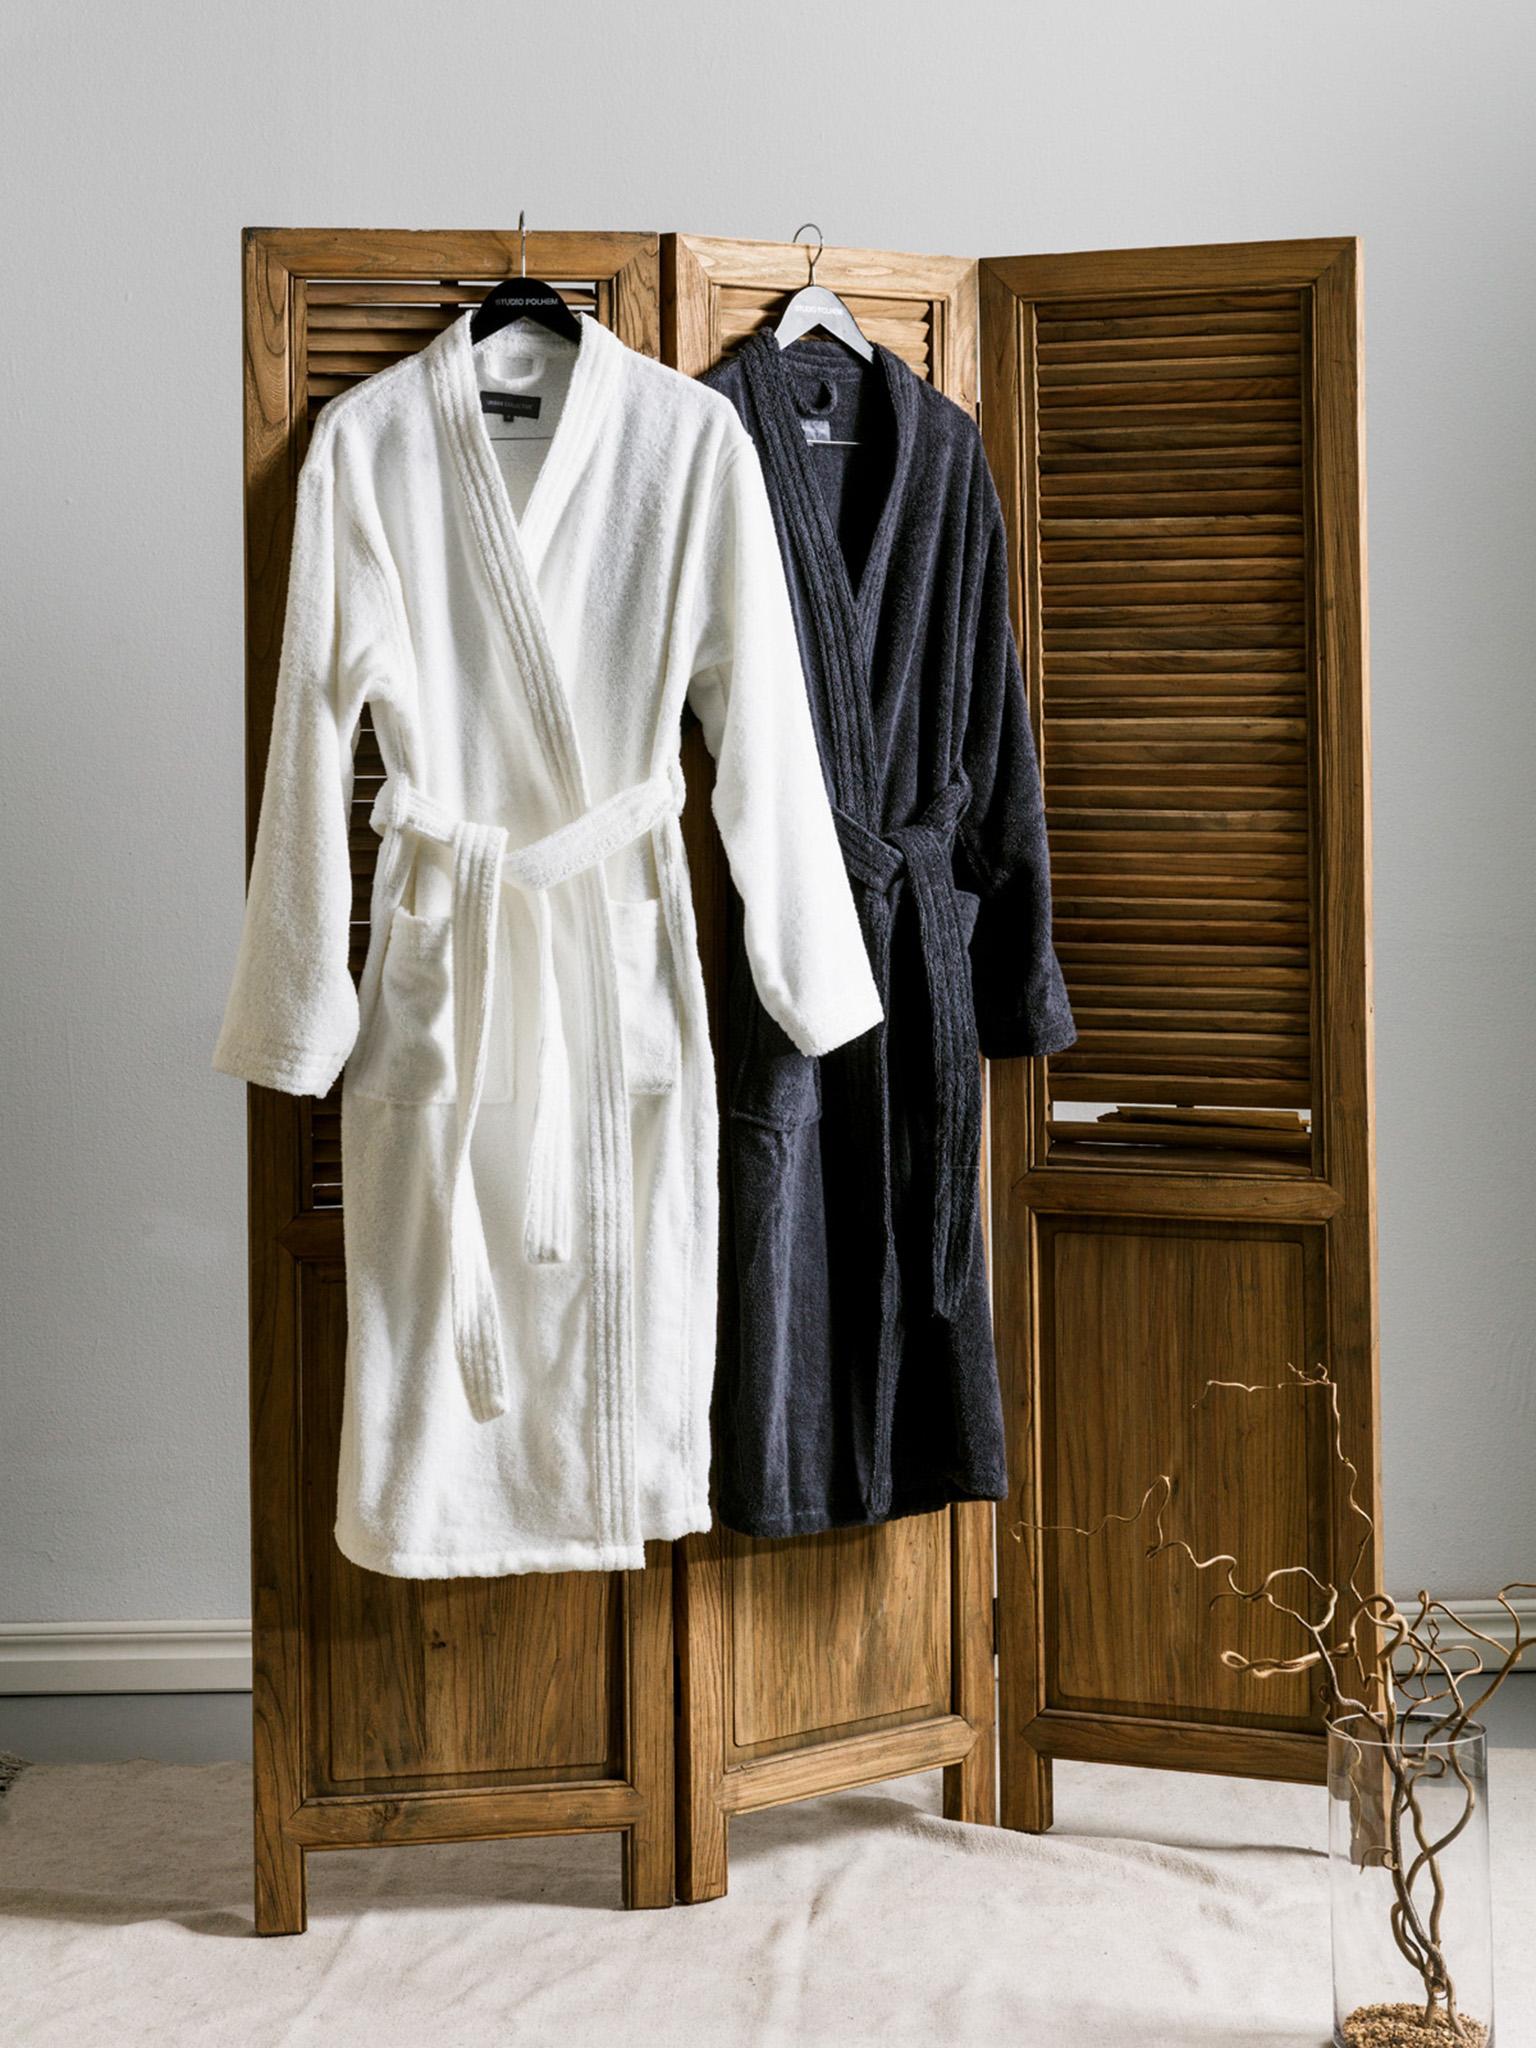 Recreate an environment: Urban Collective’s range of dressing gowns are soft and organic